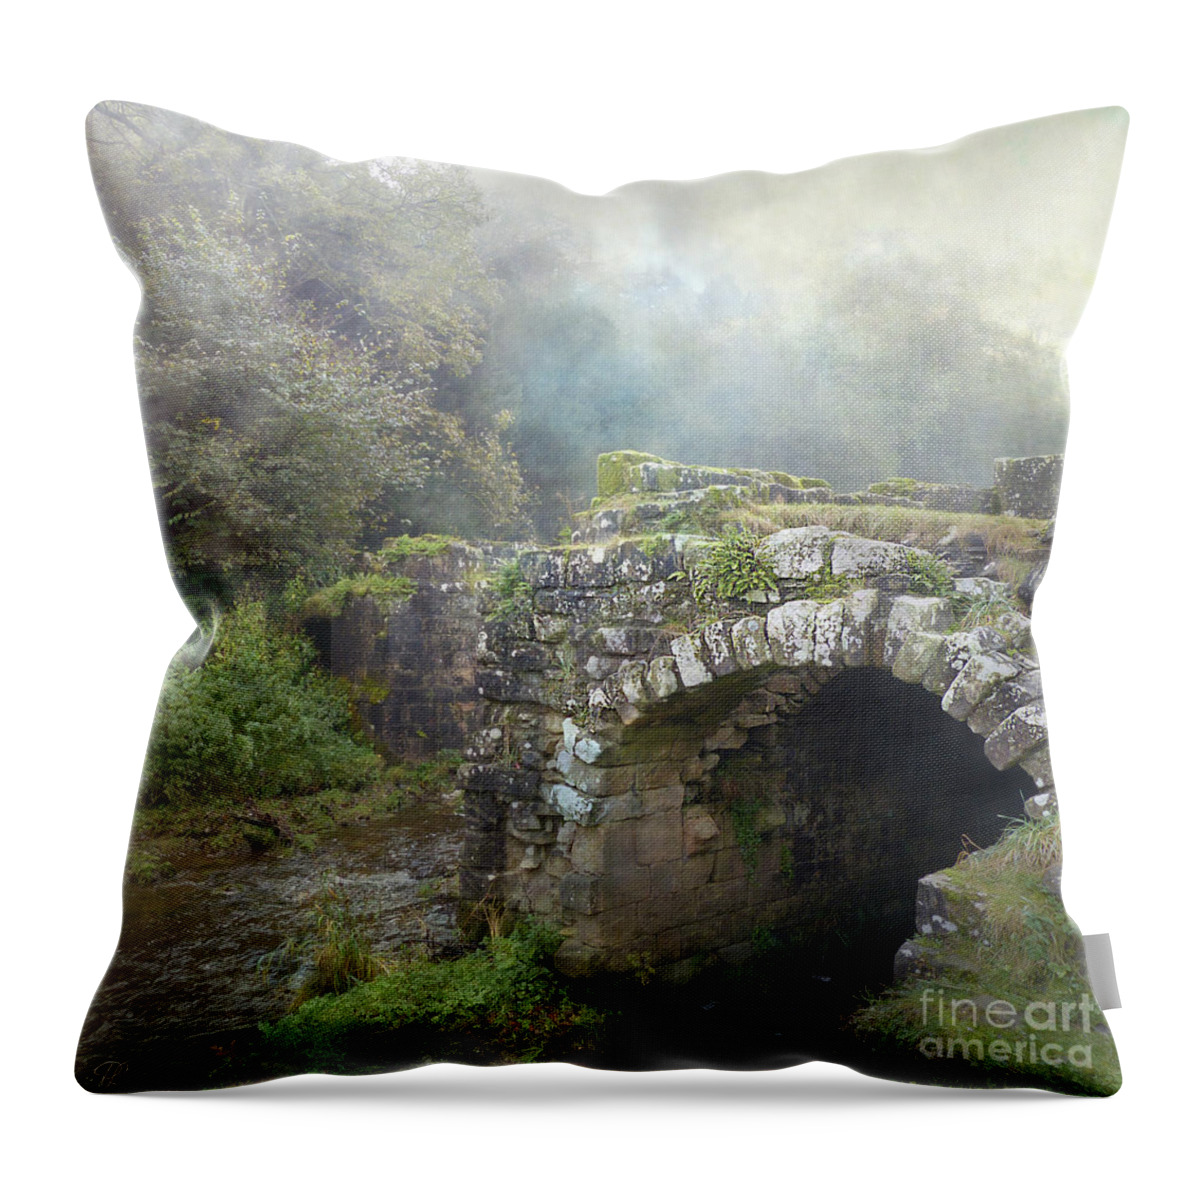 How Much Do You Love Her? Throw Pillow featuring the photograph How much do you love her? by LemonArt Photography